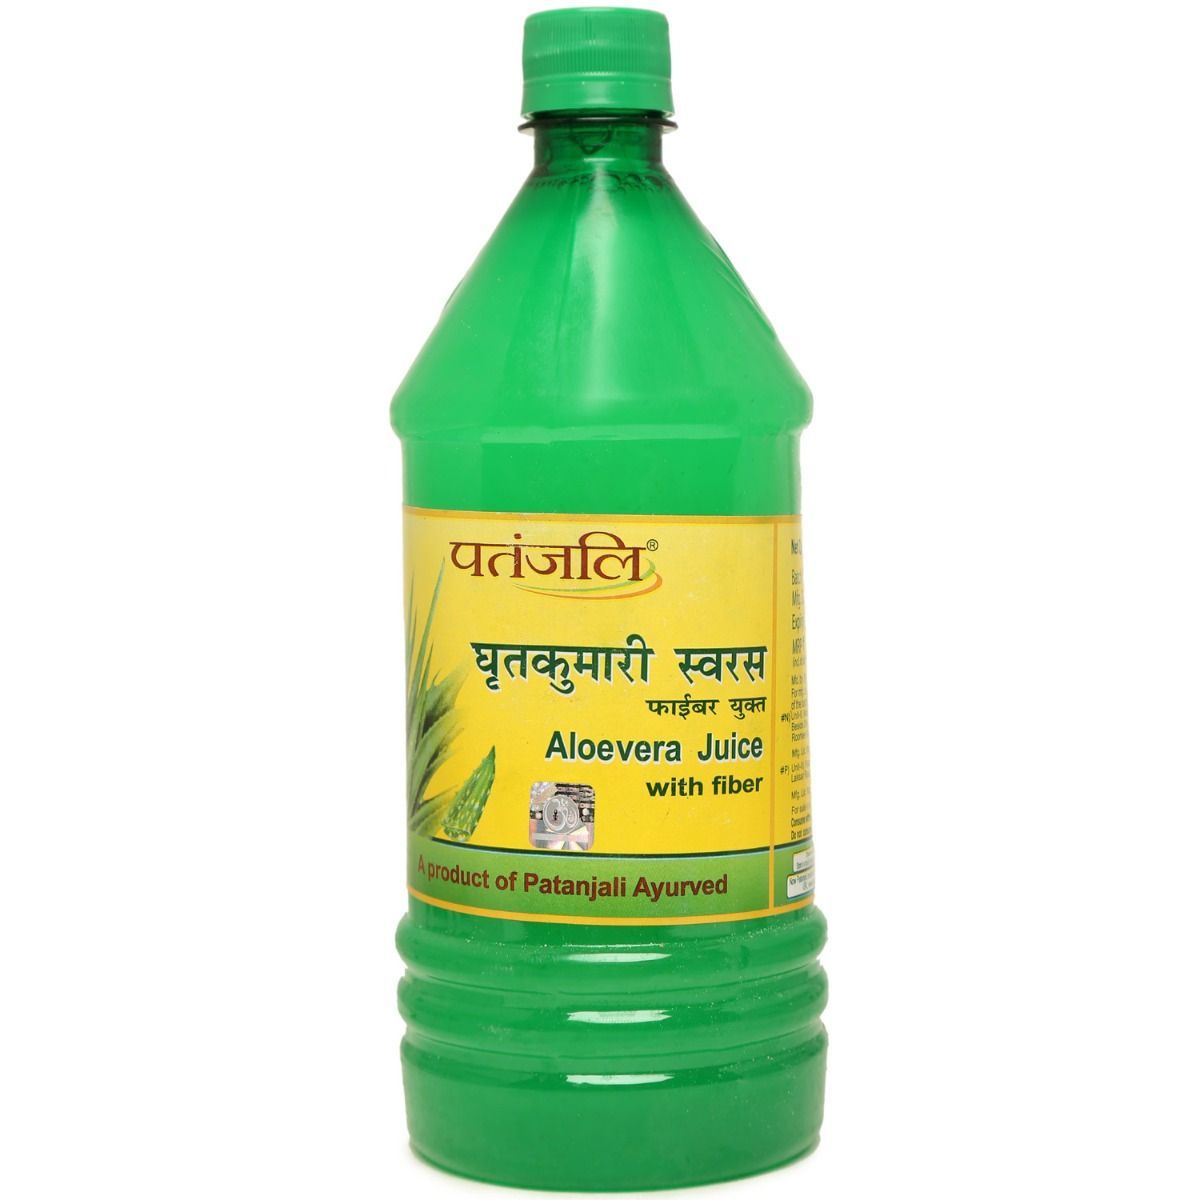 Patanjali Aloe Vera Juice with Fiber, 1 Litre Price, Uses, Side Effects,  Composition - Apollo Pharmacy